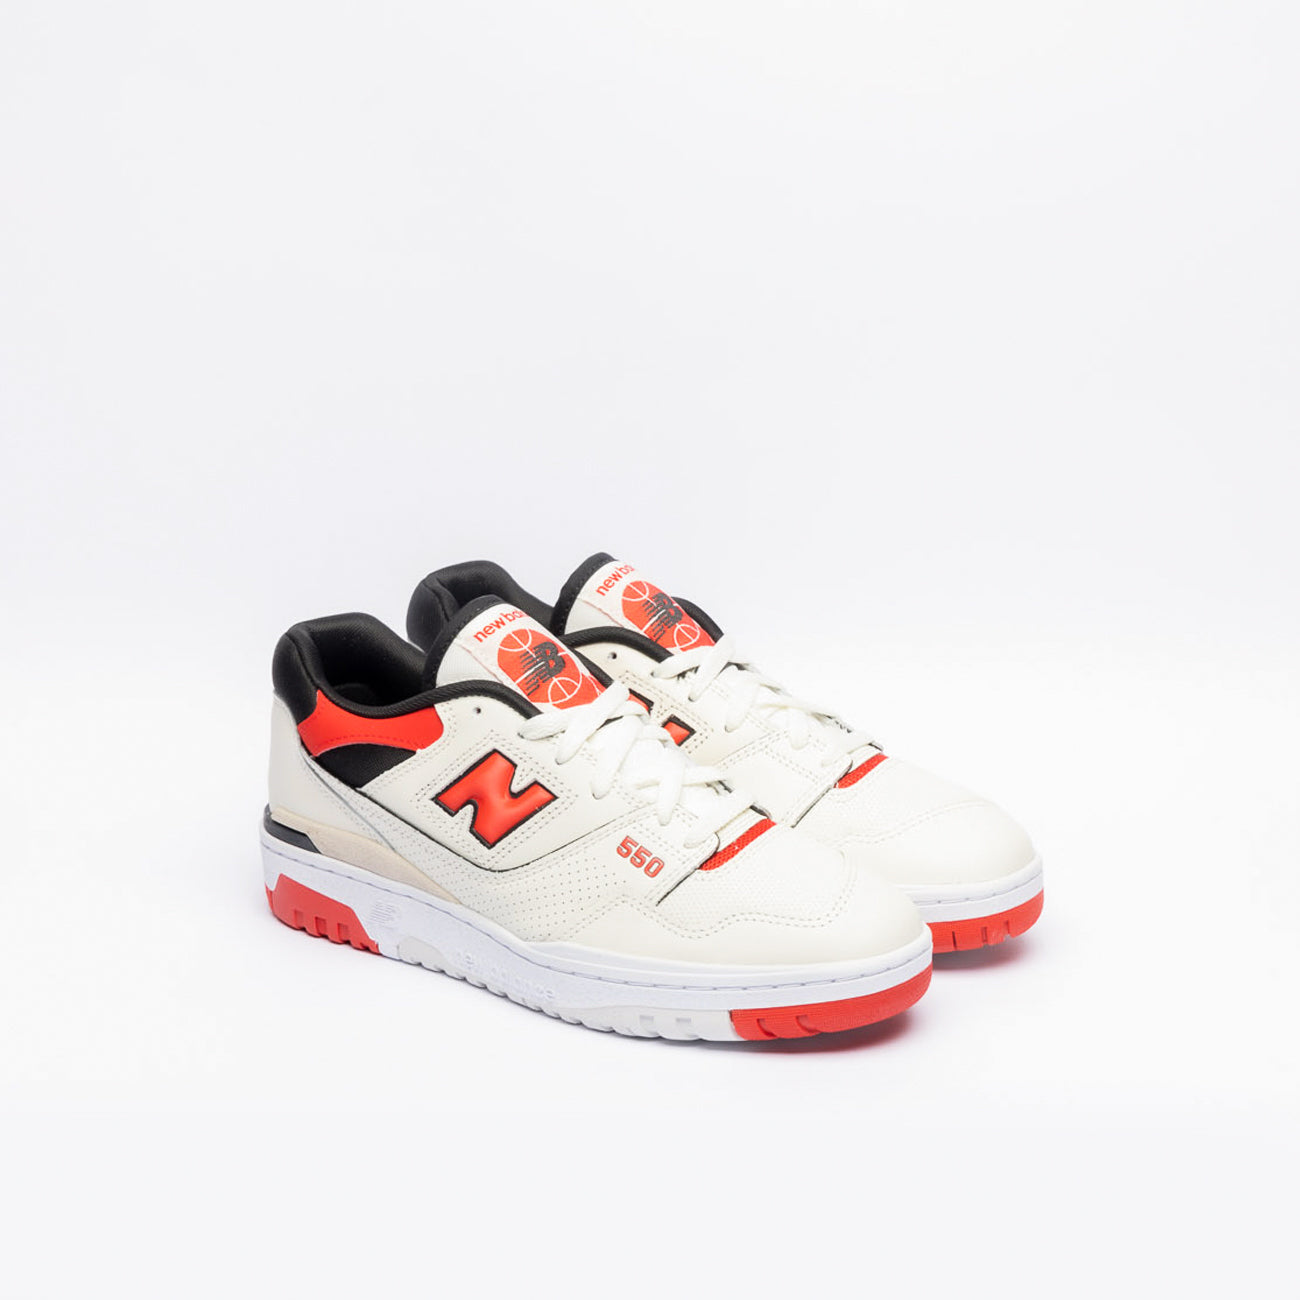 New Balance BB55VTB low basketball sneaker in cream leather and red detail